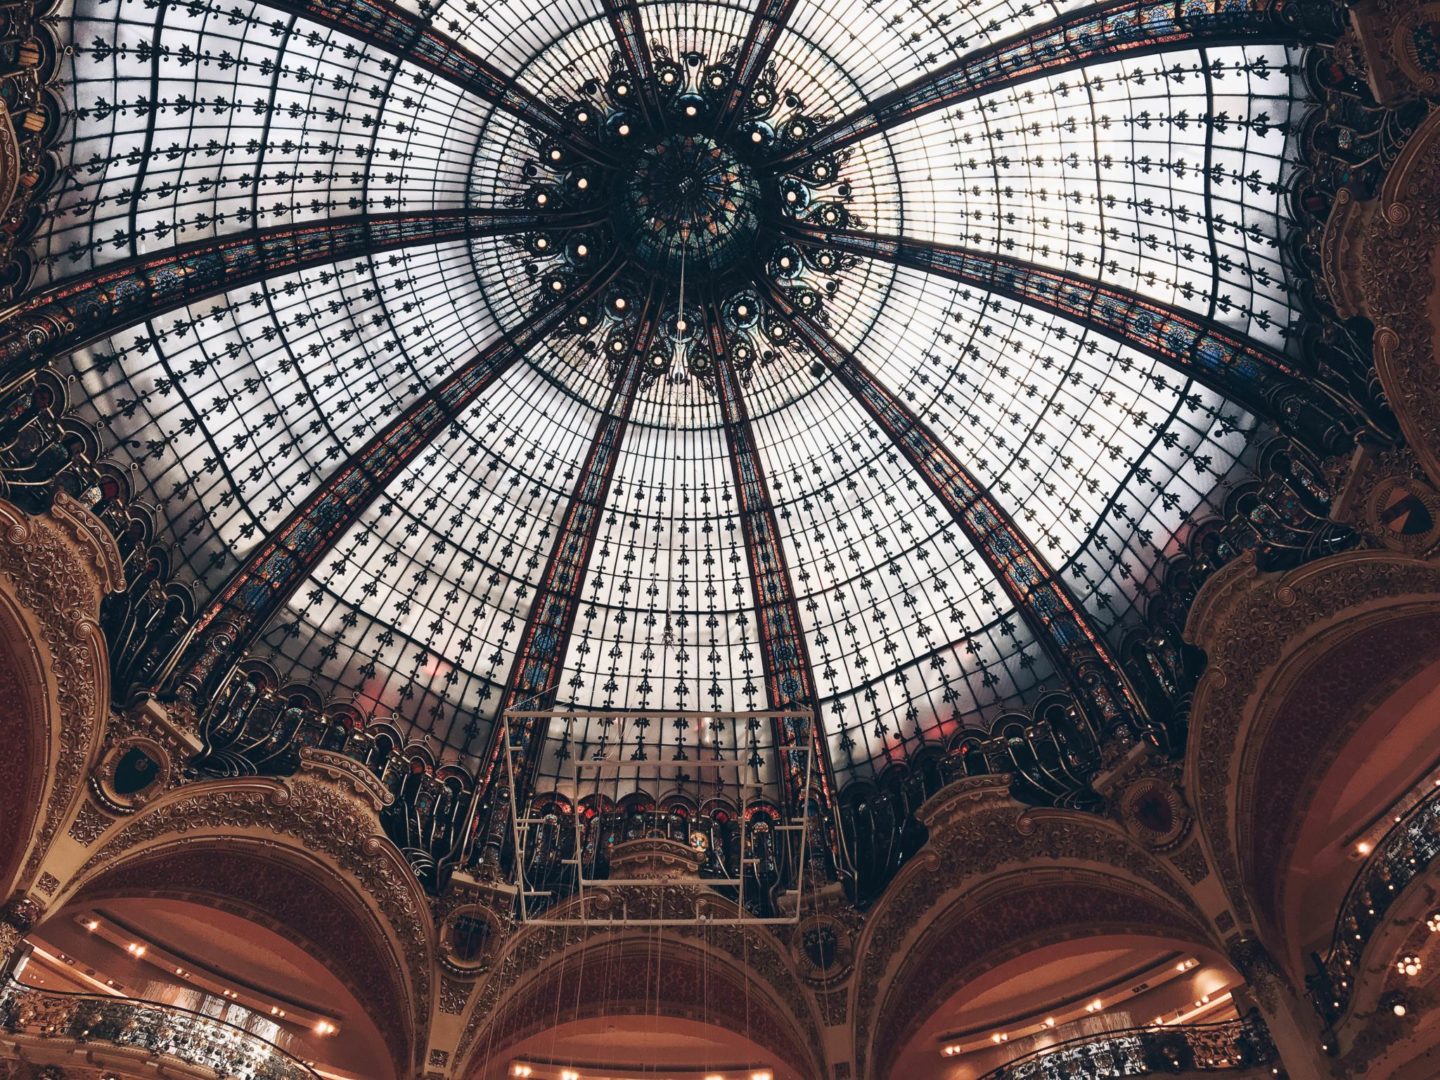 25 Things to Eat, See, Photograph, & Do in Paris, France